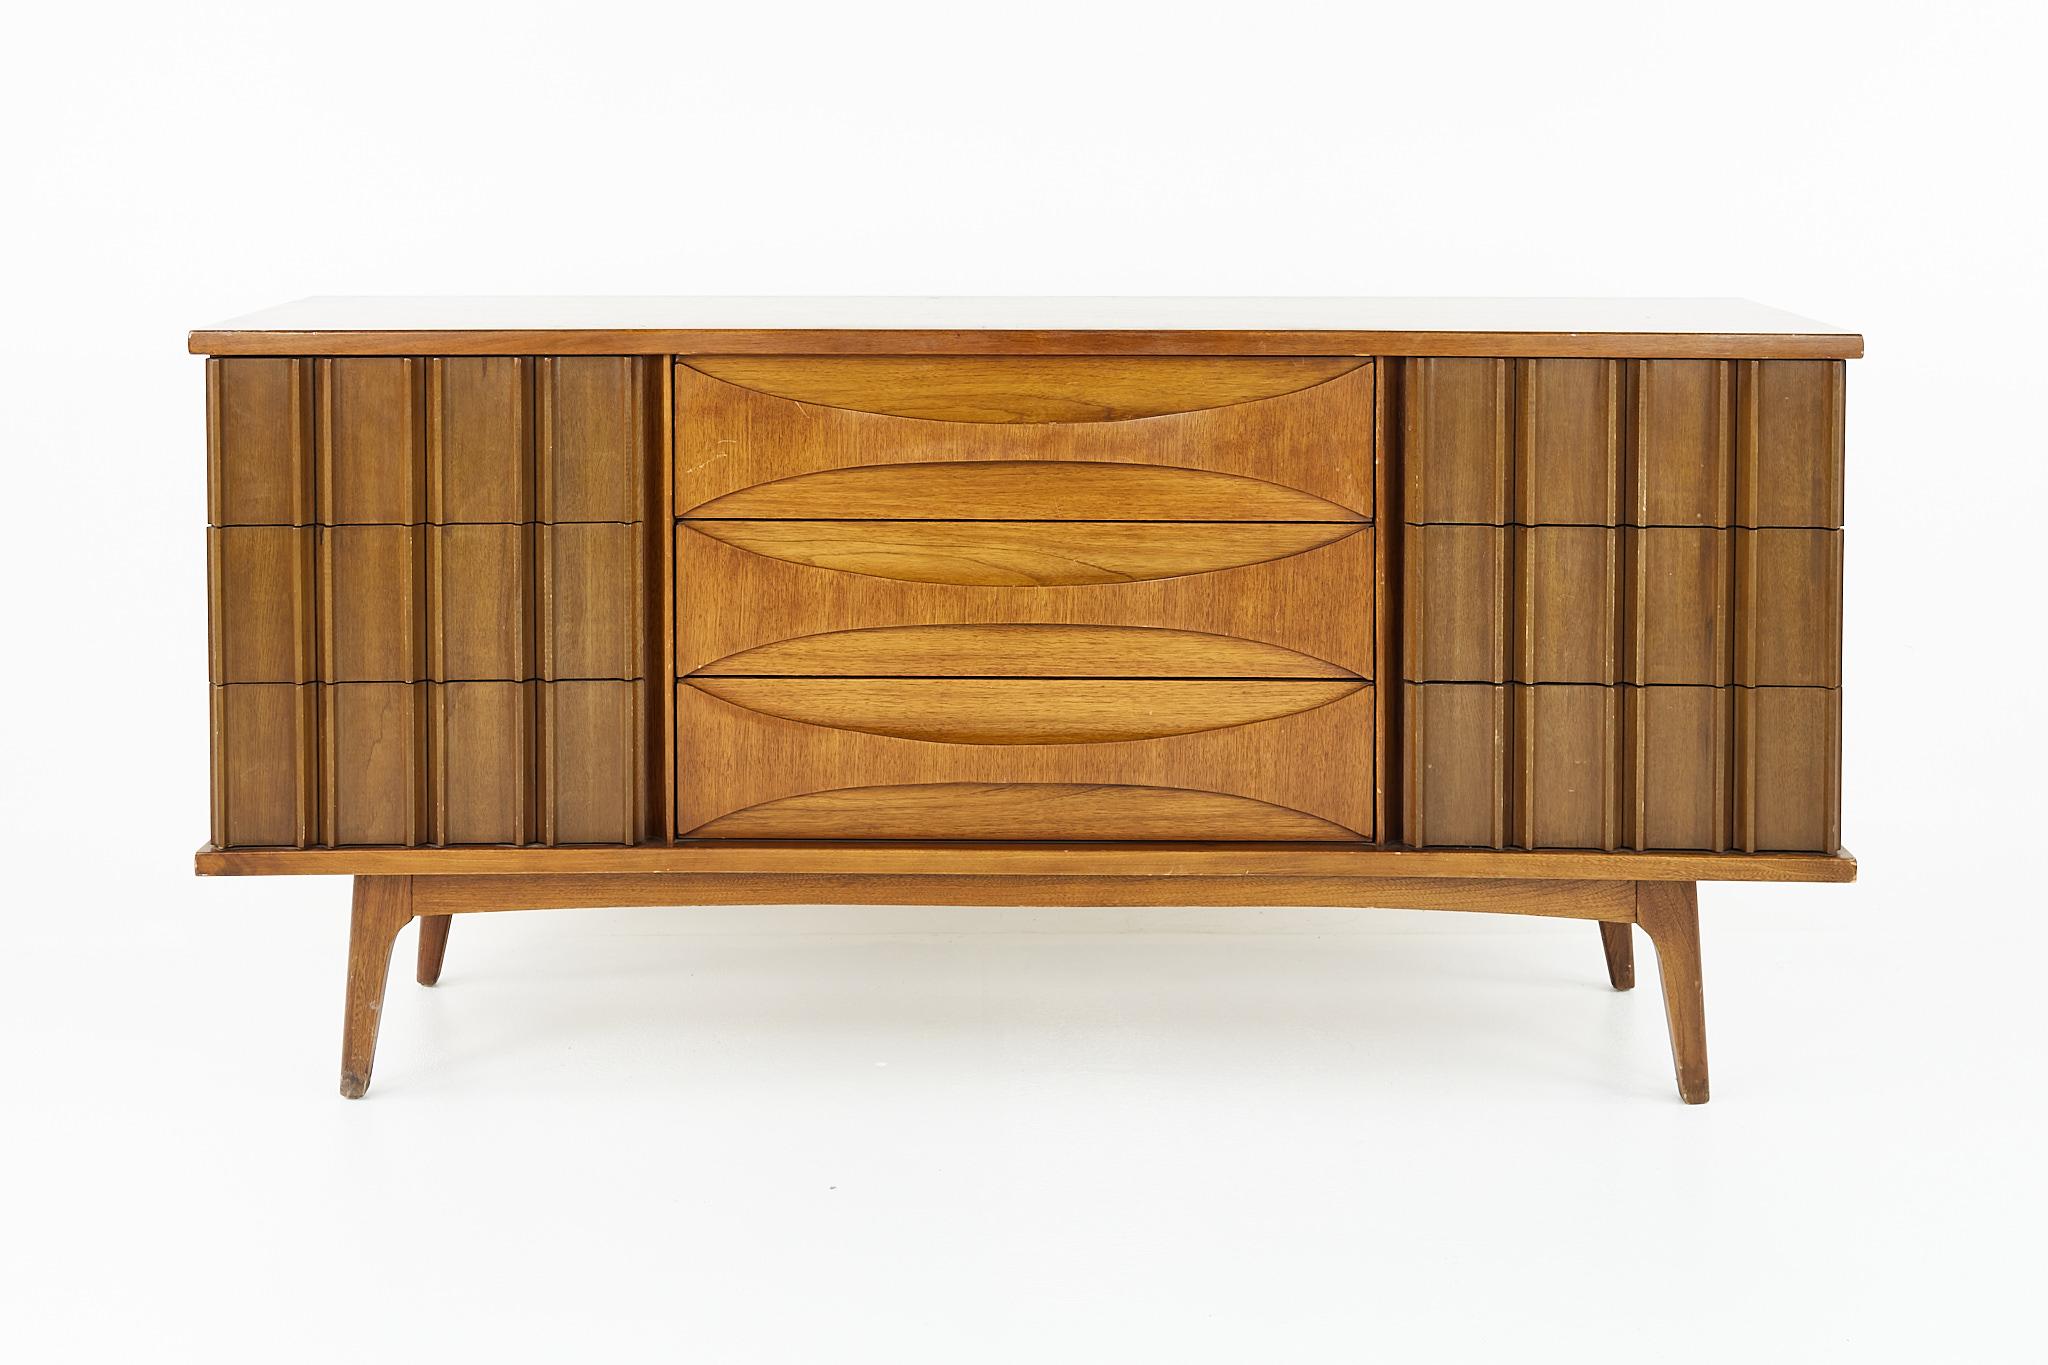 United Furniture Mid Century Walnut 9 Drawer Credenza Lowboy Dresser

This dresser measures: 64 wide x 18 deep x 30.75 inches high

?All pieces of furniture can be had in what we call restored vintage condition. That means the piece is restored upon